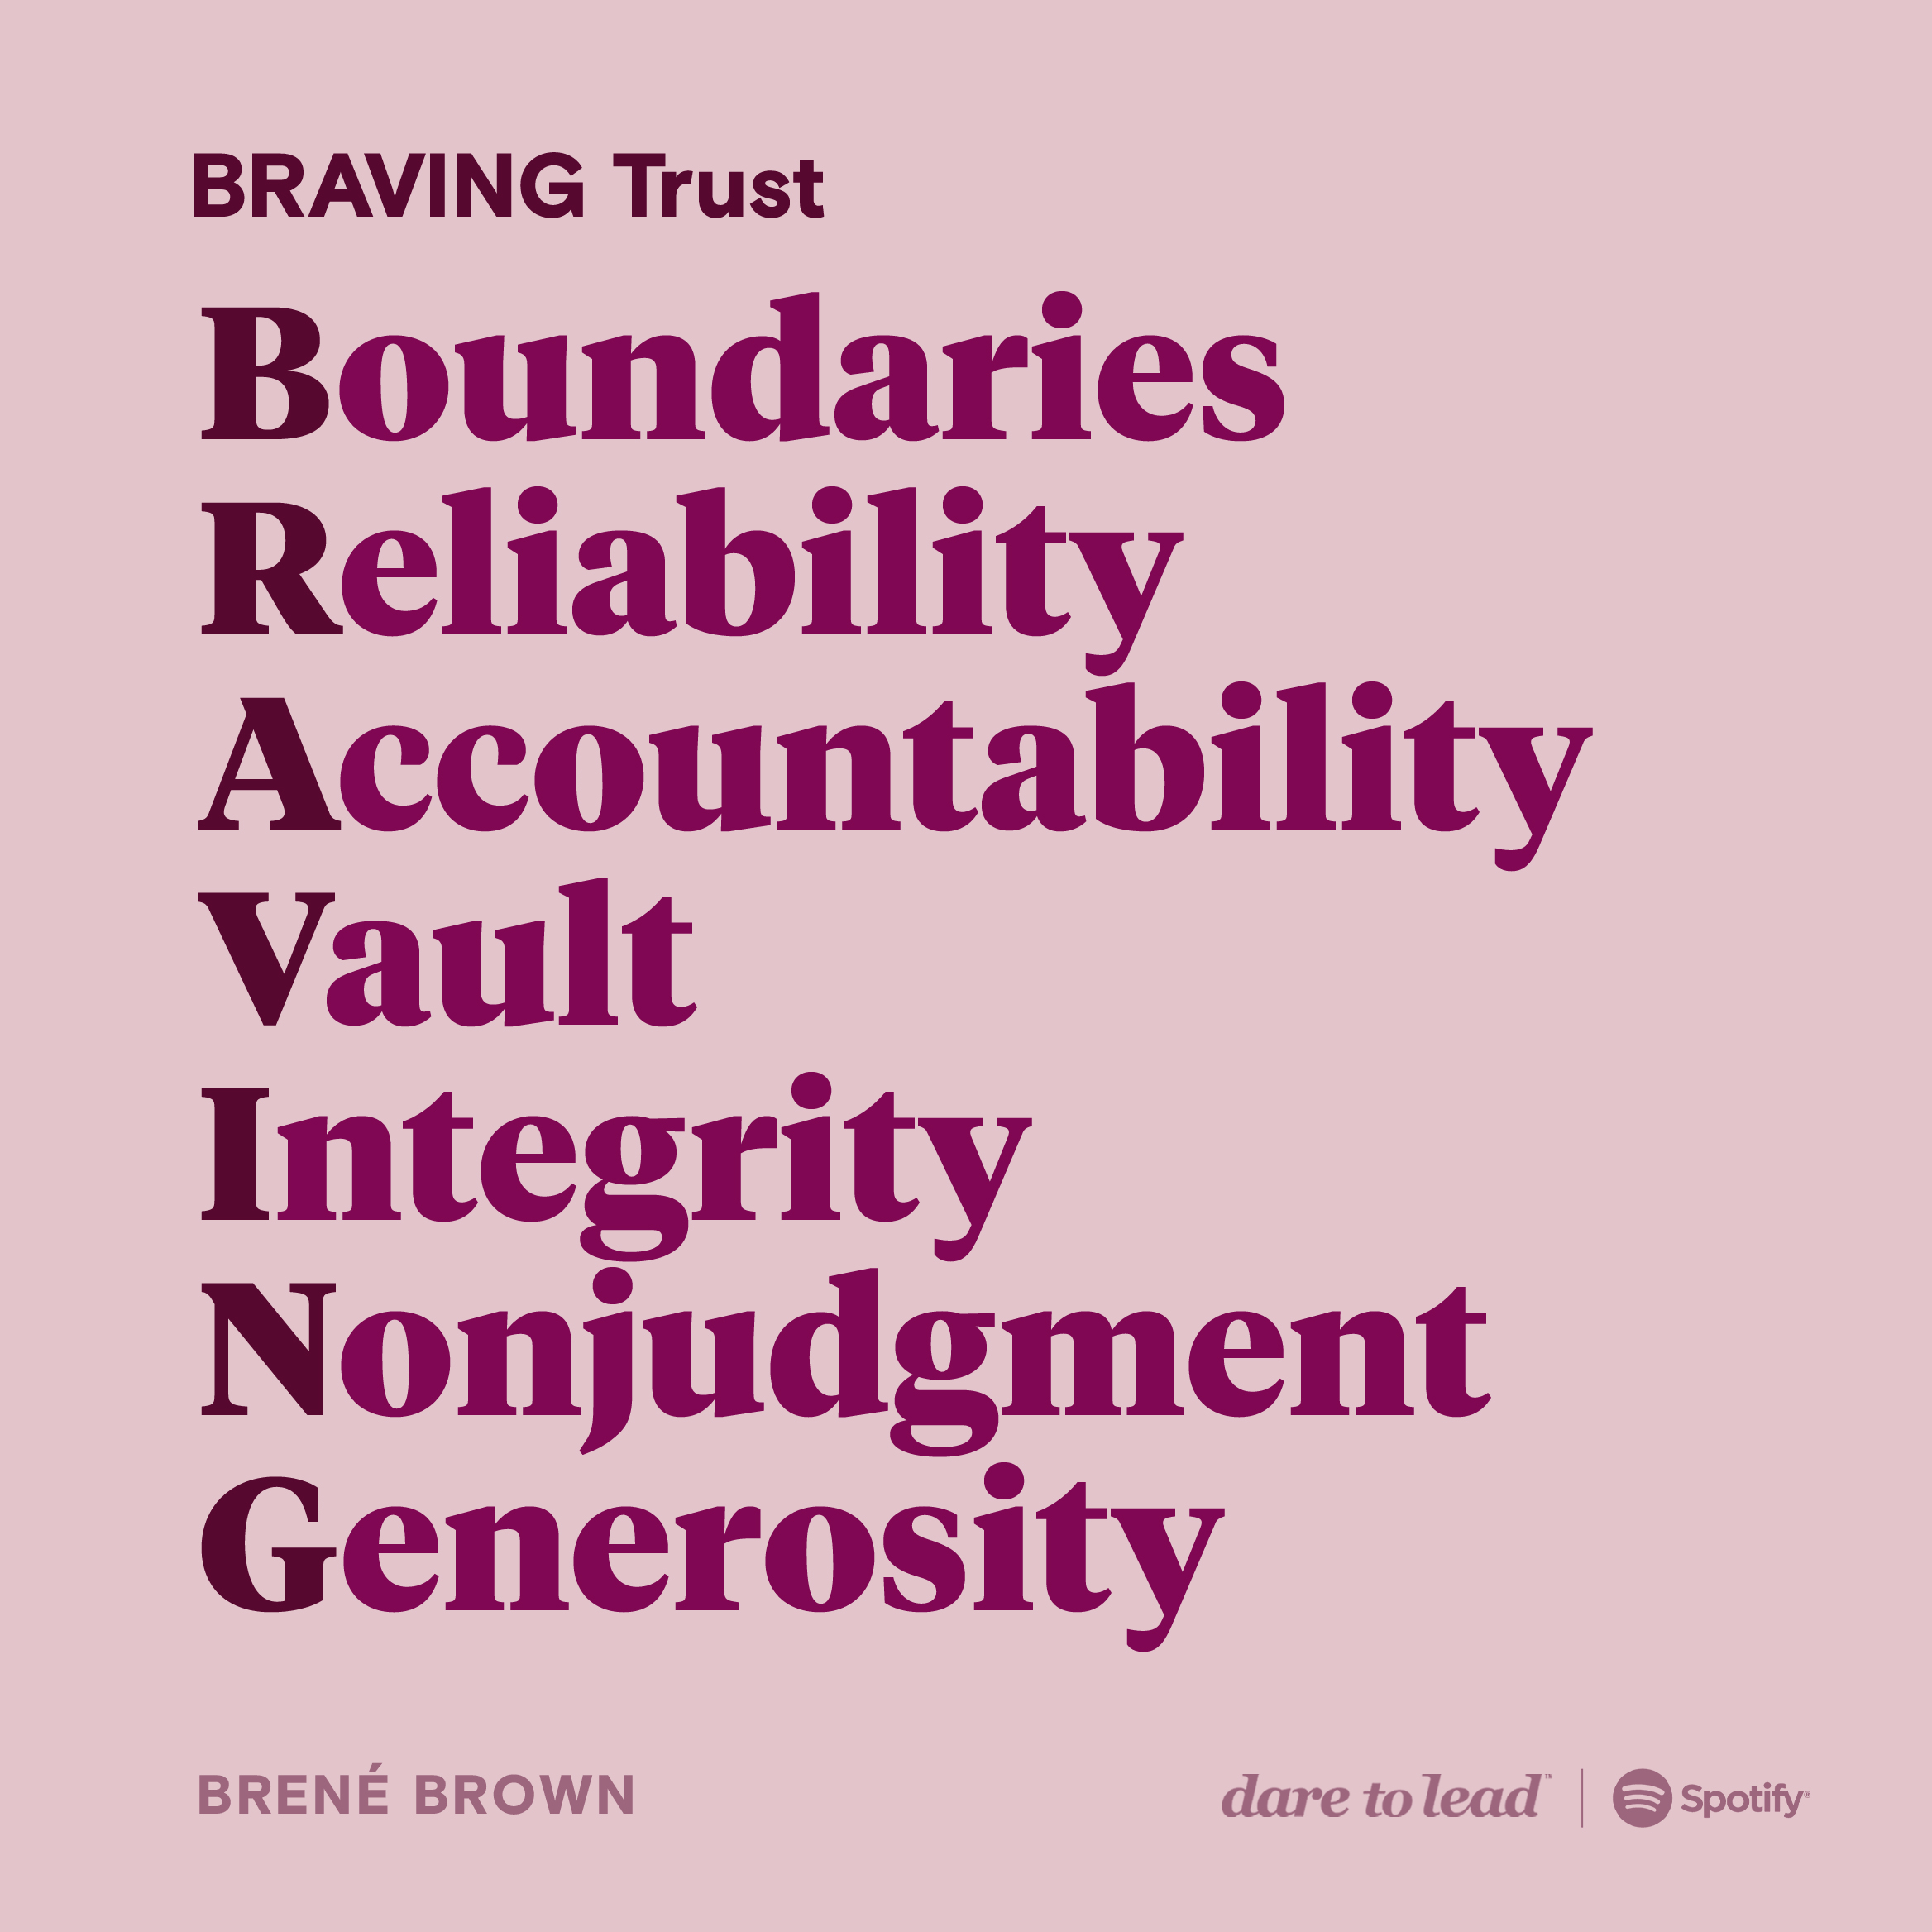 The BRAVING acronym, which details the seven core elements of trust: boundaries, reliability, accountability, vault, integrity, nonjudgment, and generosity.